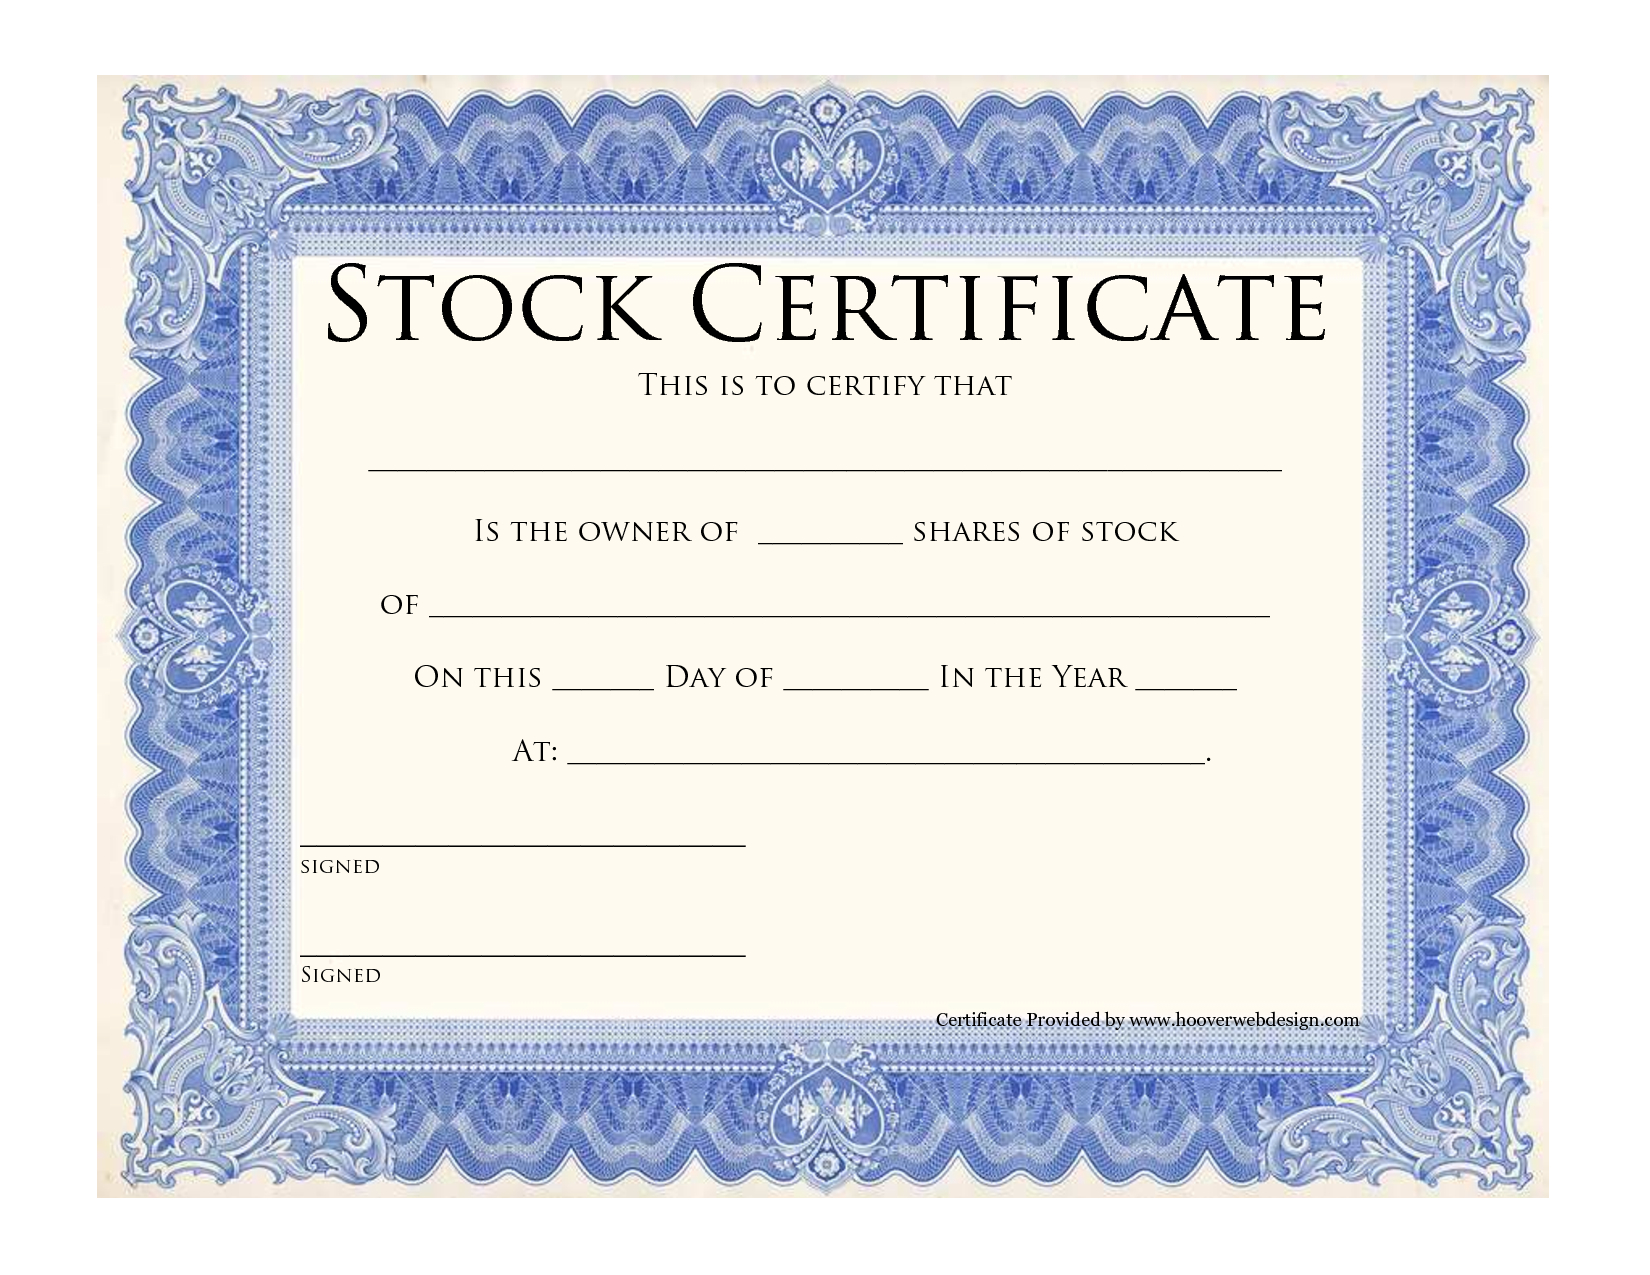 Blank Stock Certificate Template | Printable Stock Pertaining To Corporate Share Certificate Template